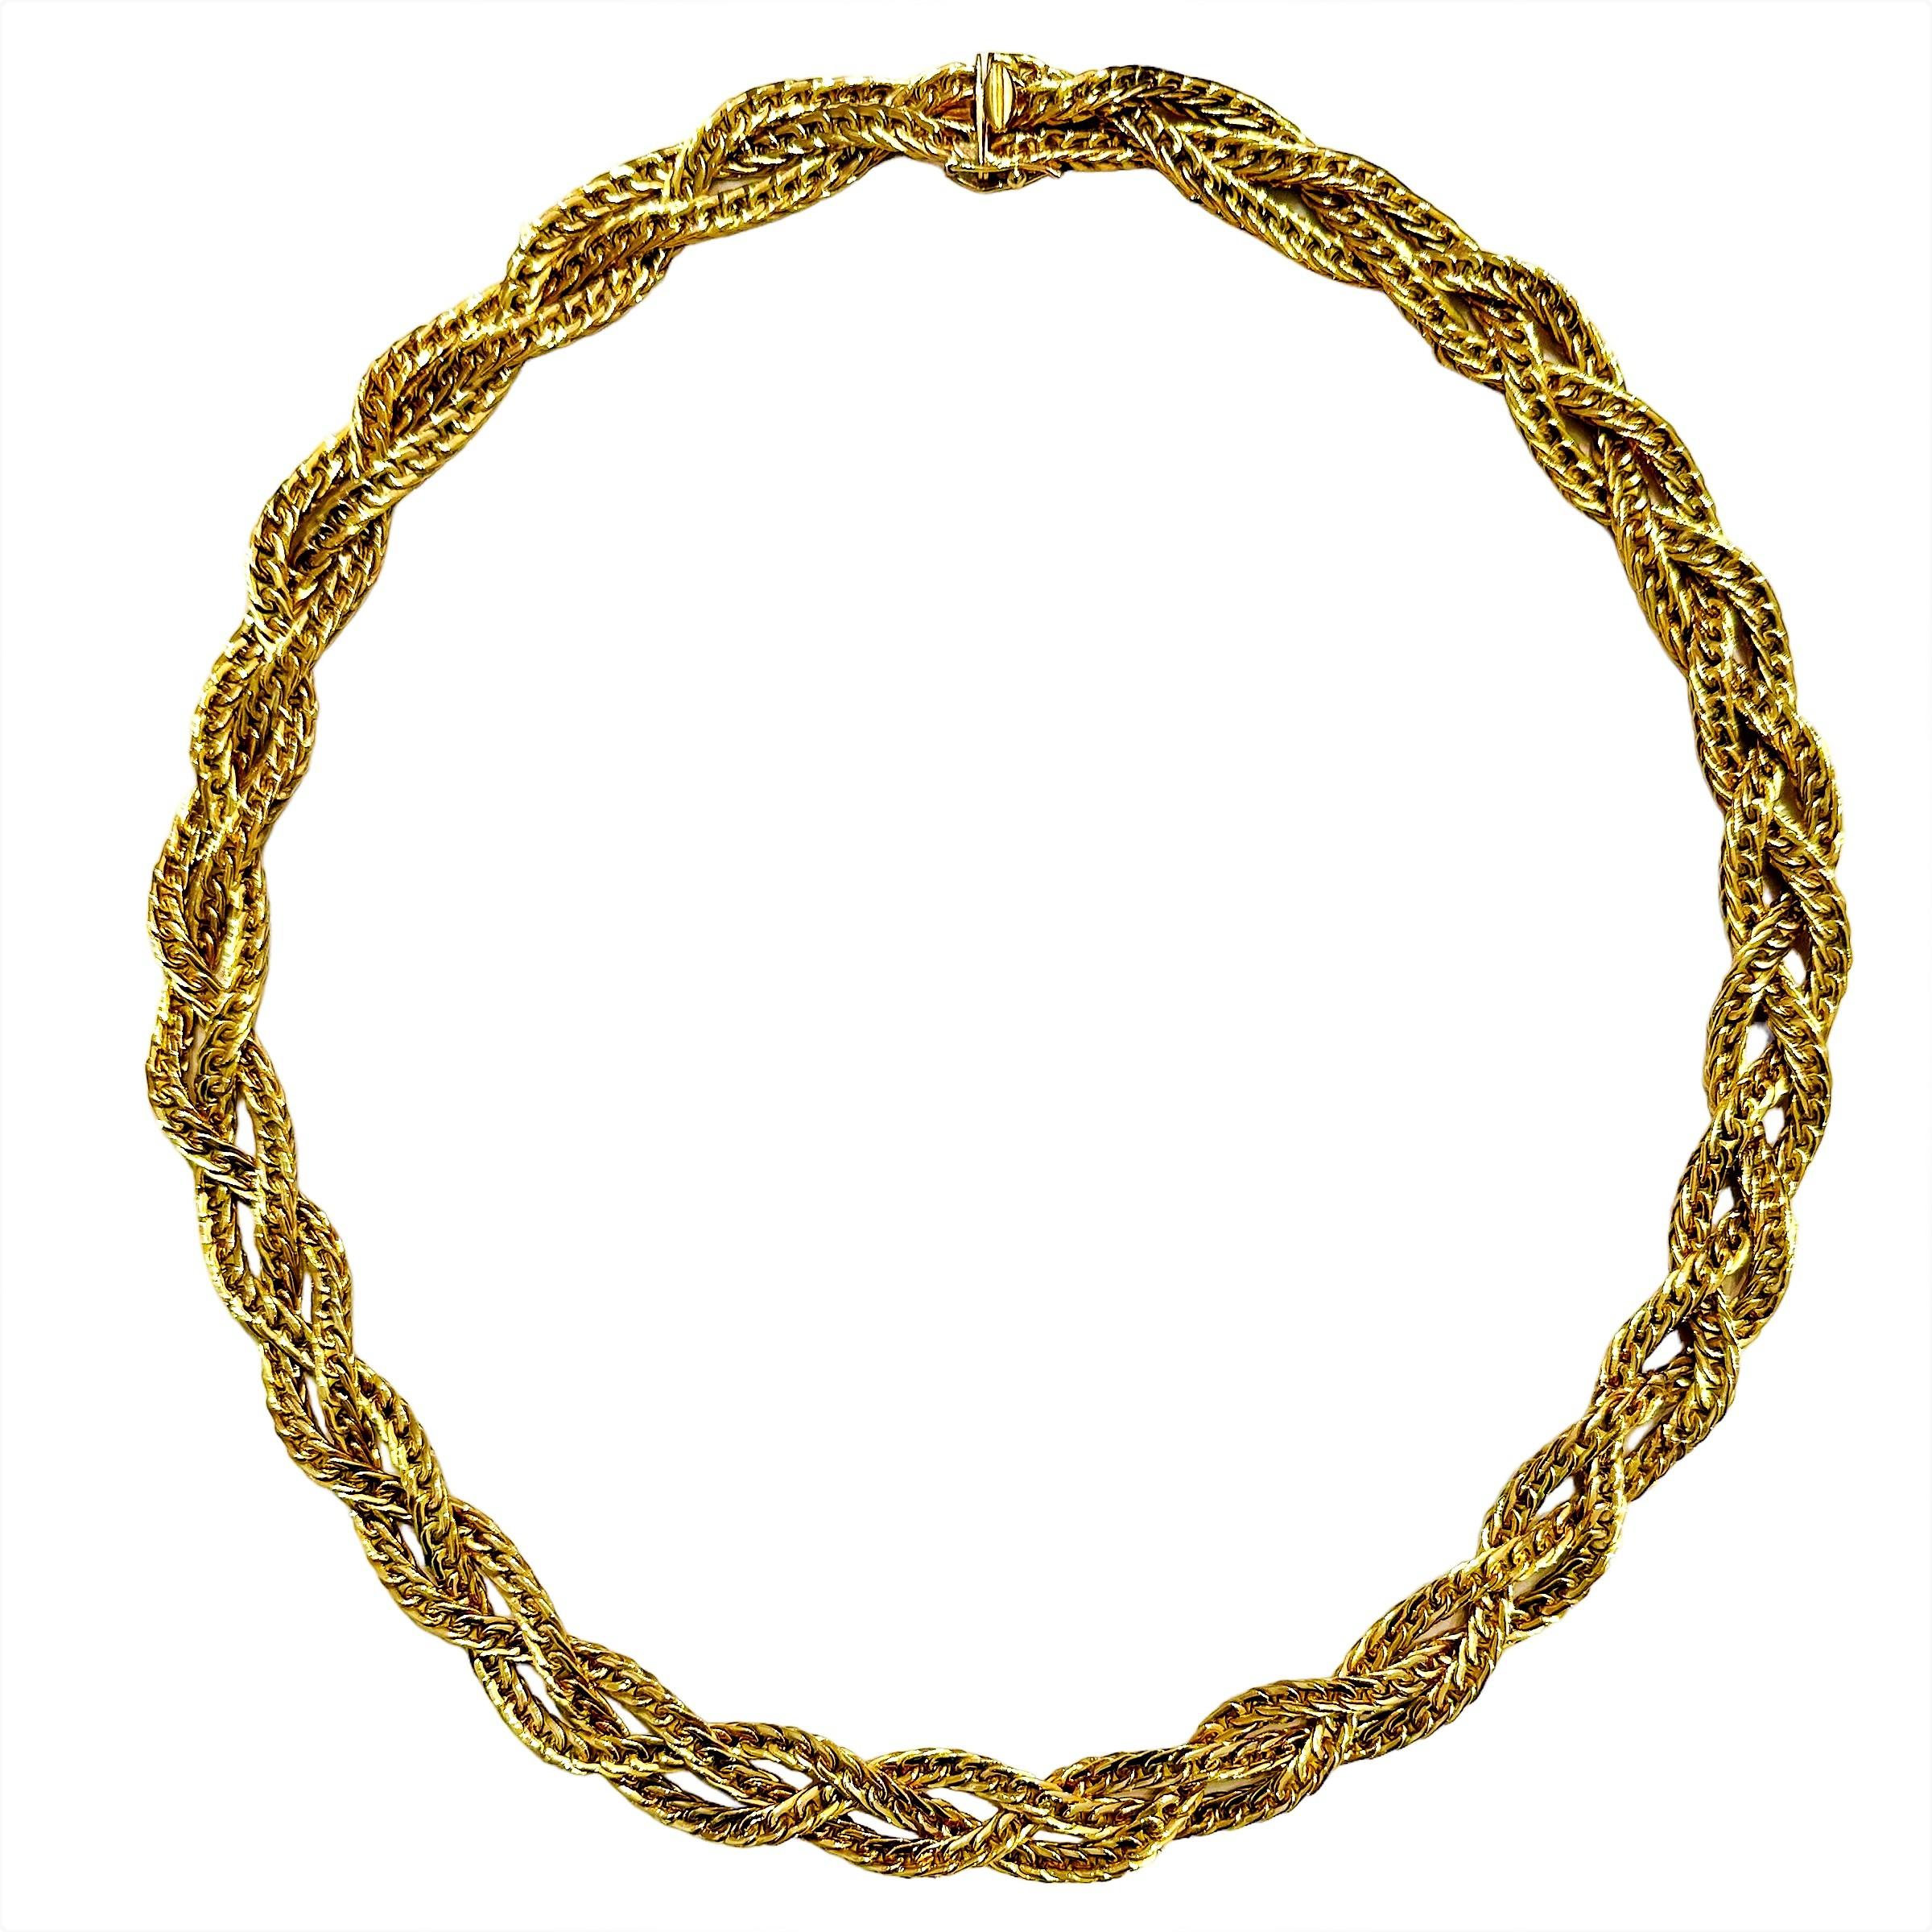 This elegant three strand 18K yellow gold braided vintage necklace was imagined and created in Torino Italy at some time during the mid-20th century. It often seems that only Italian goldsmiths are capable of this very high level of design